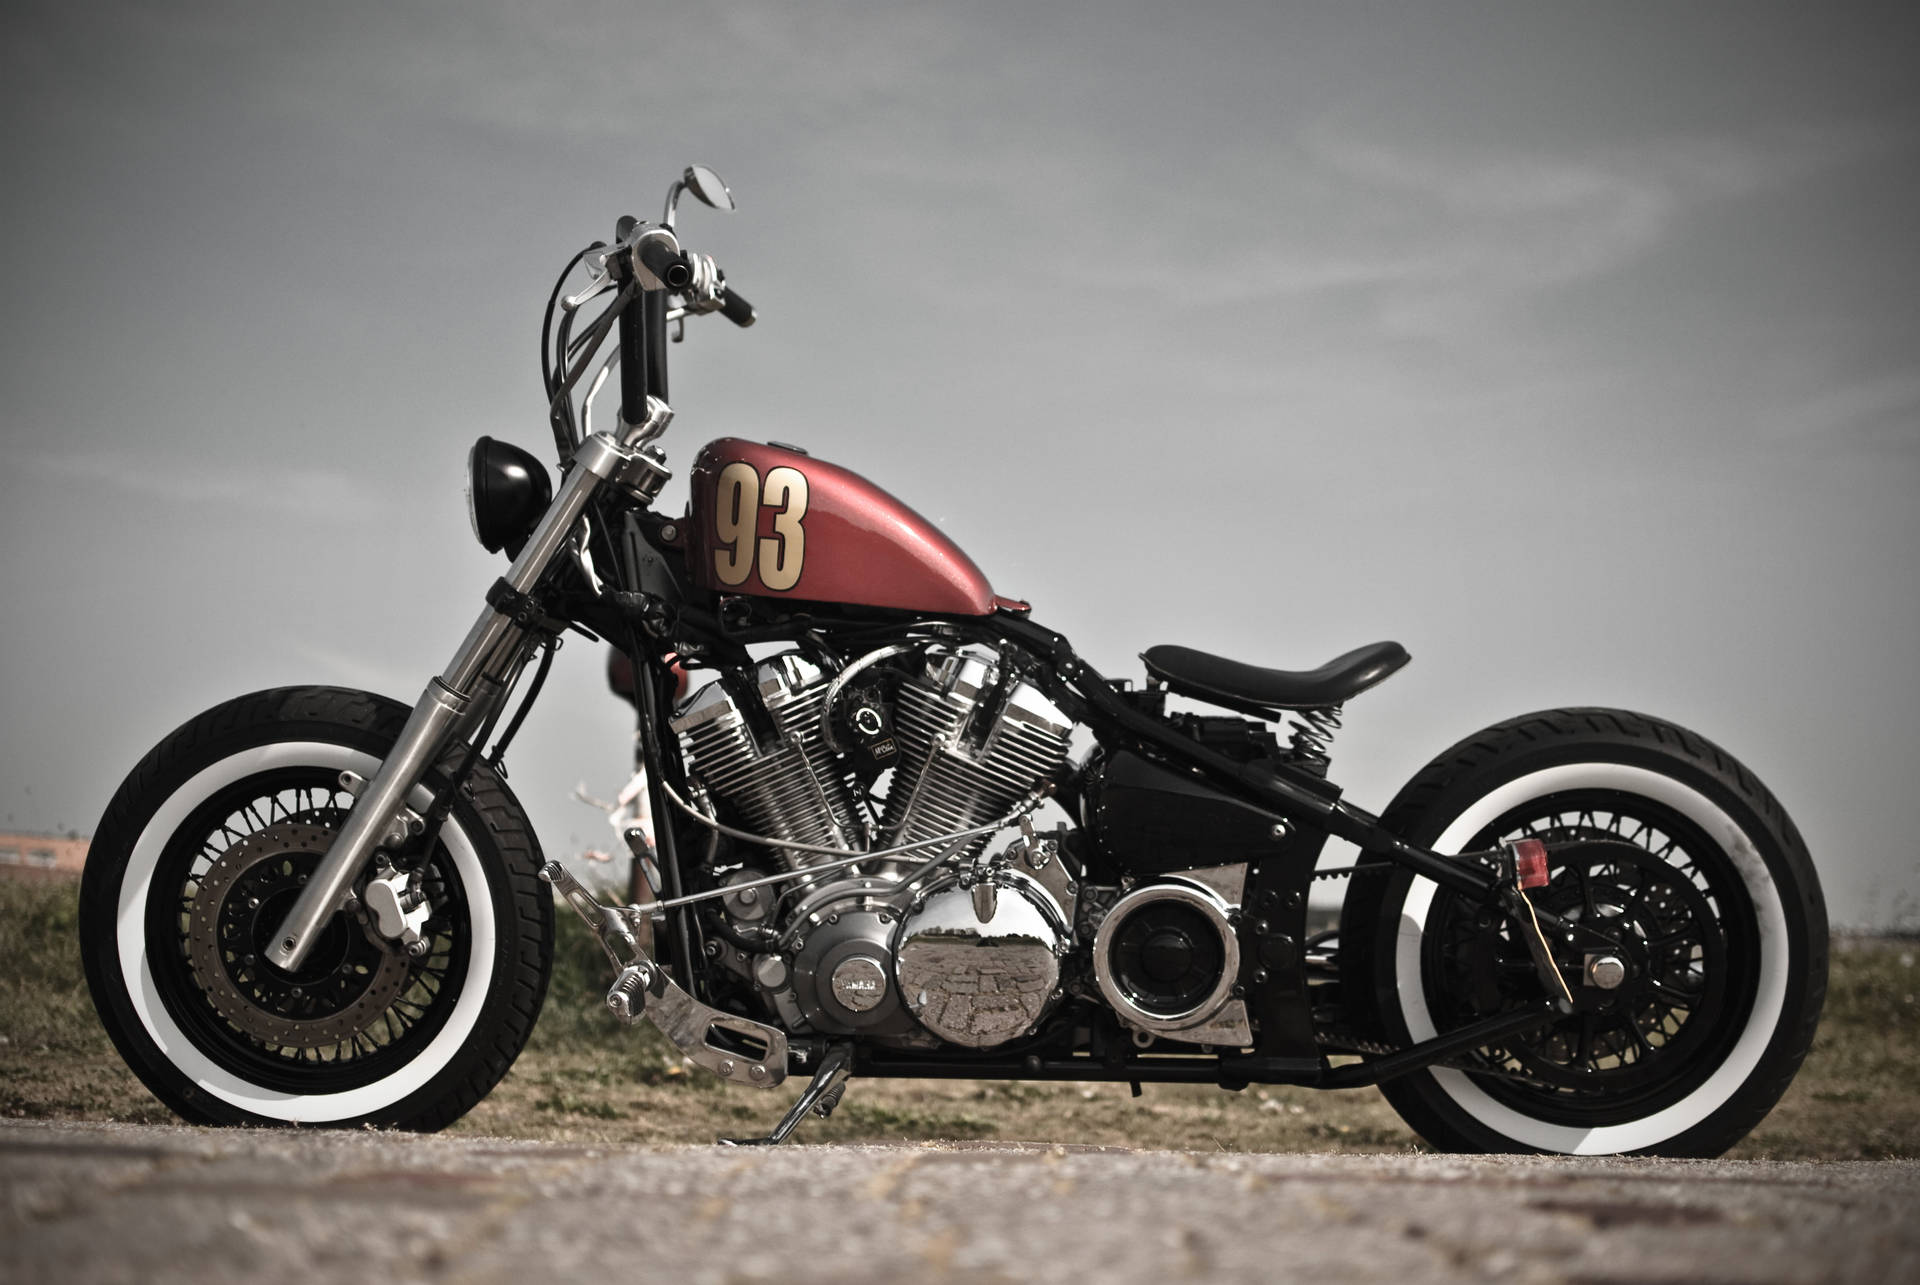 100+] Bobber Motorcycle Pictures